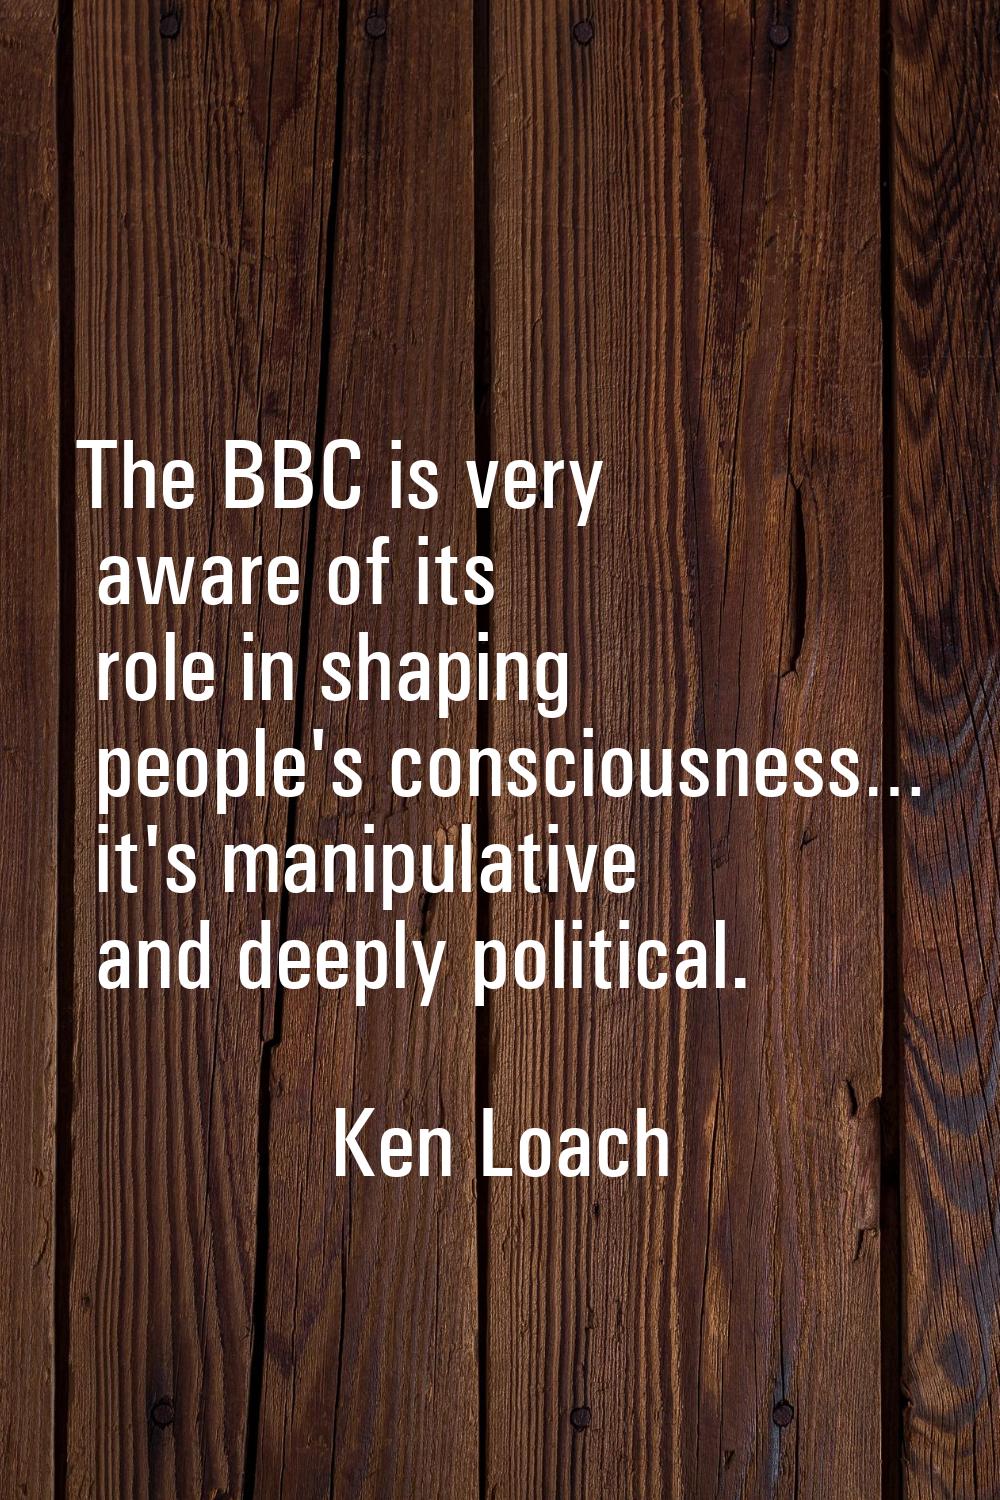 The BBC is very aware of its role in shaping people's consciousness… it's manipulative and deeply p